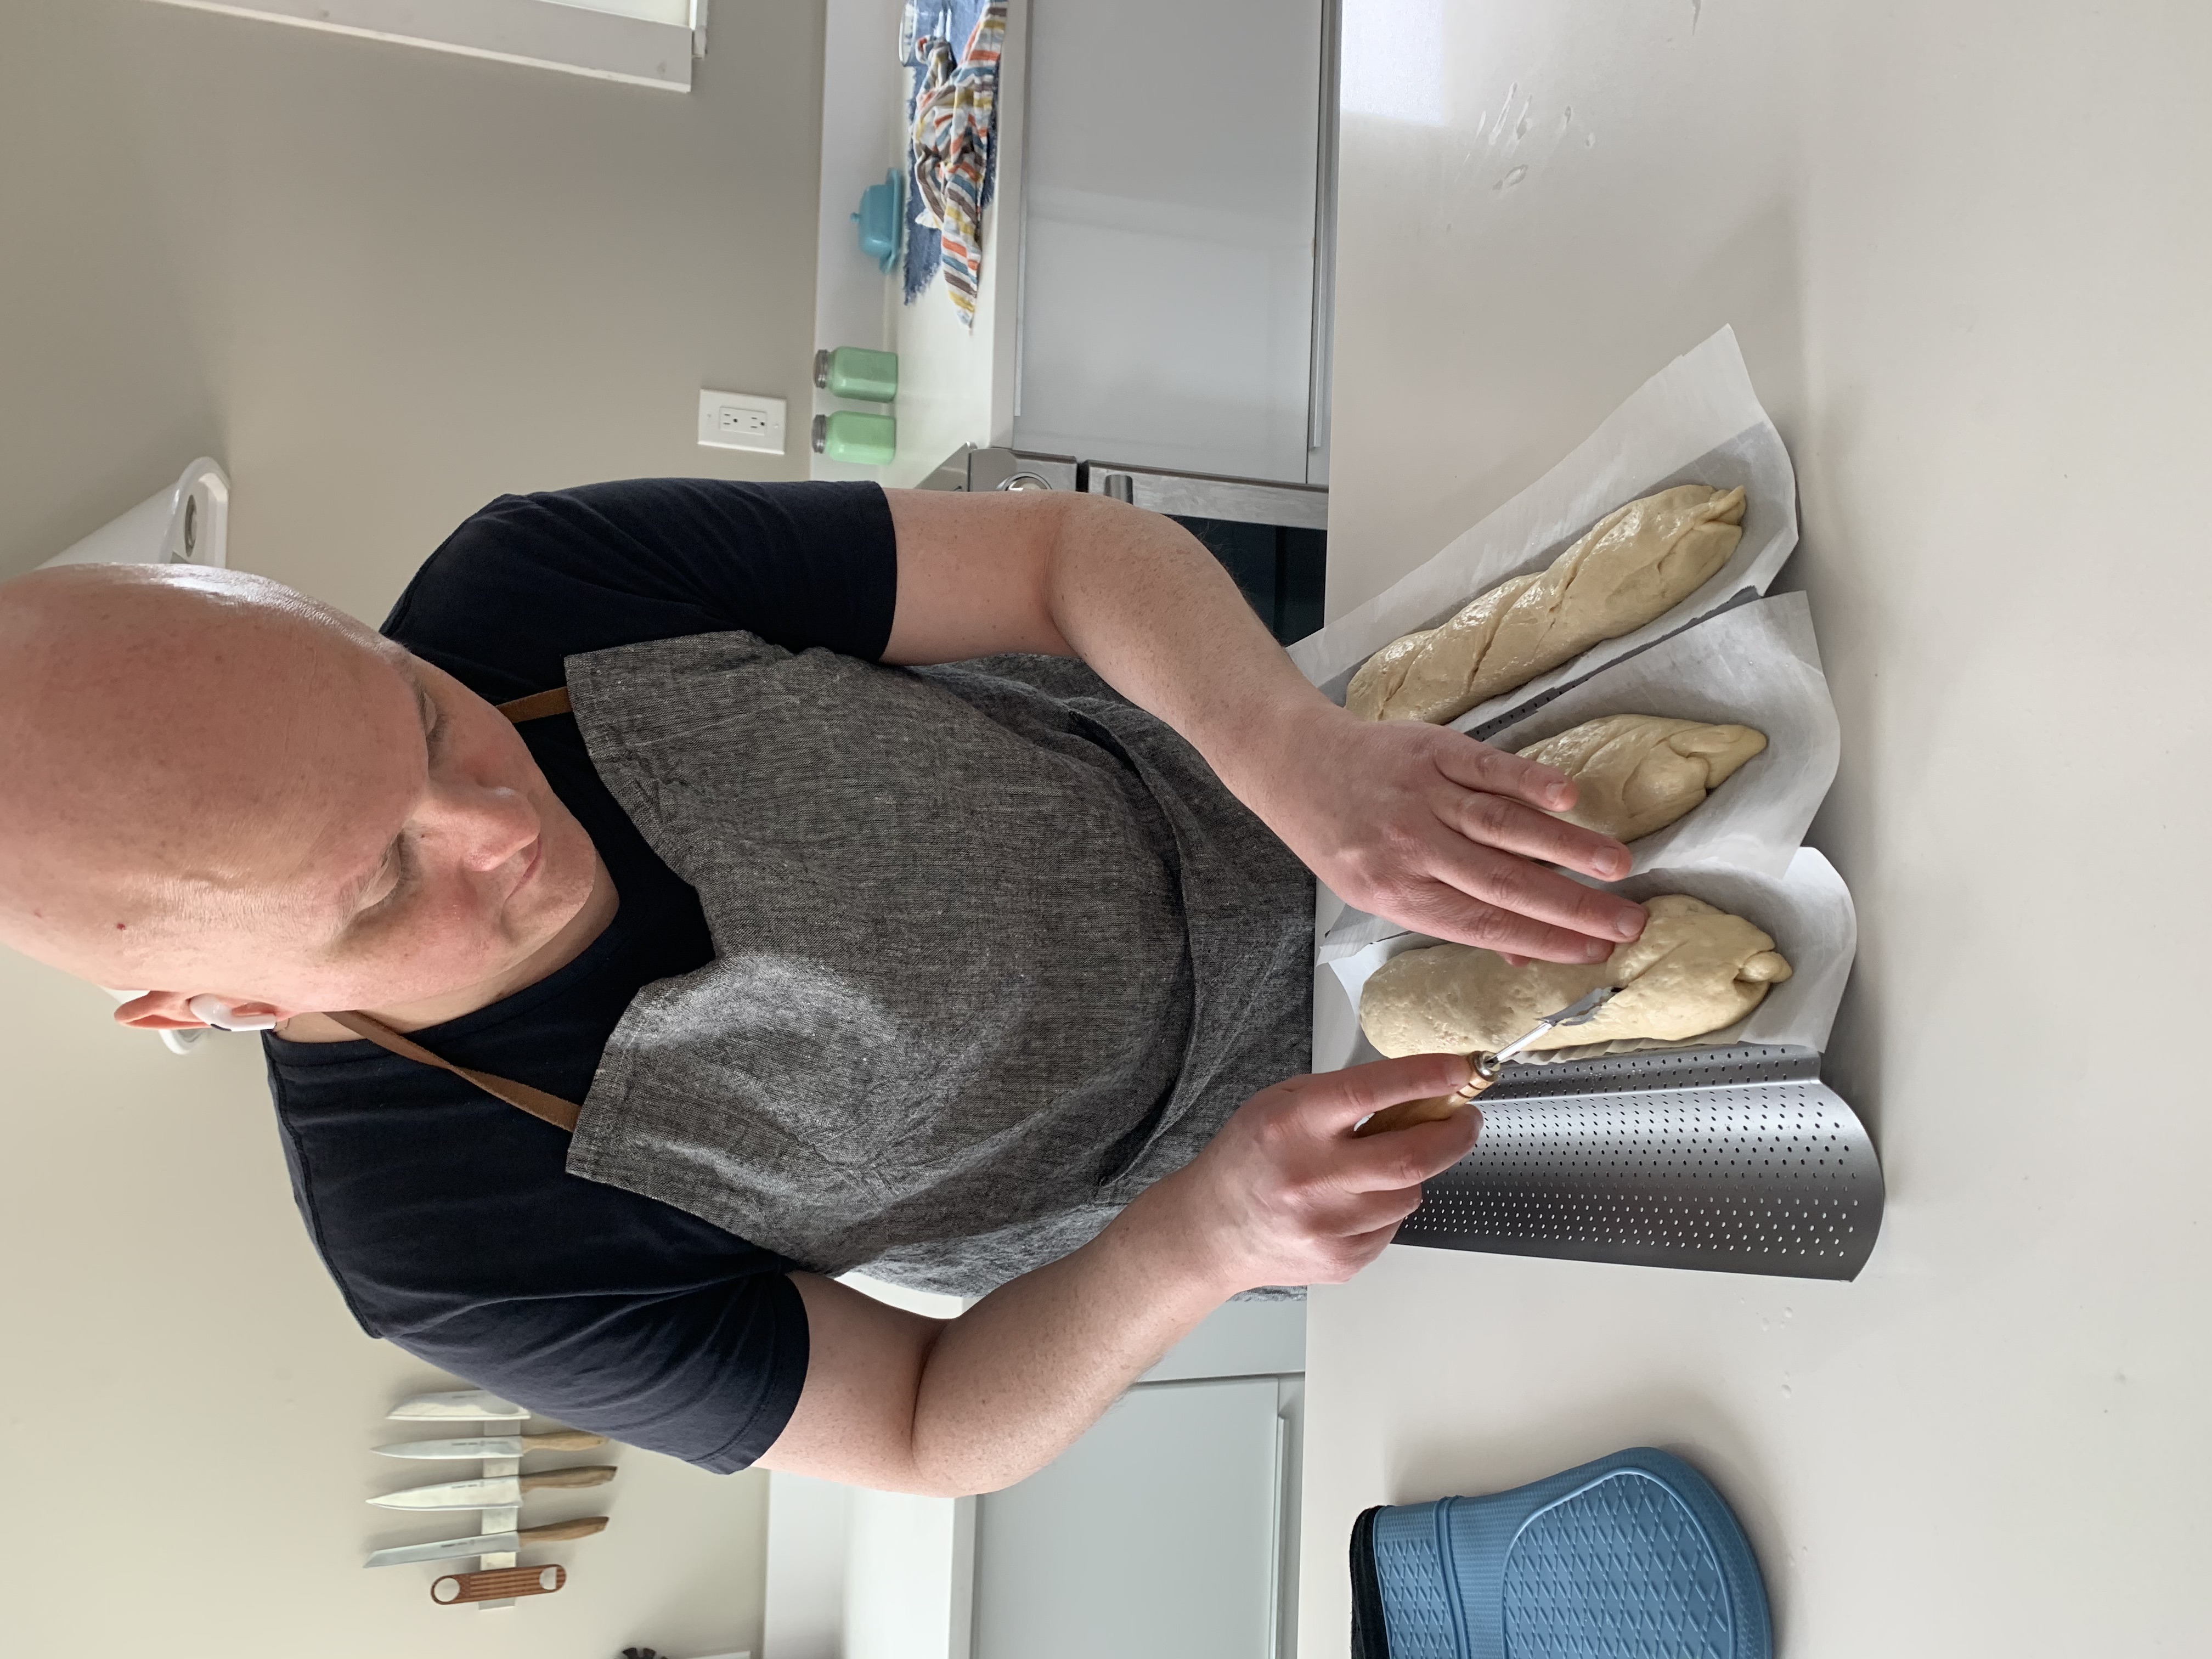 A man making french baggettes in his kitchen.